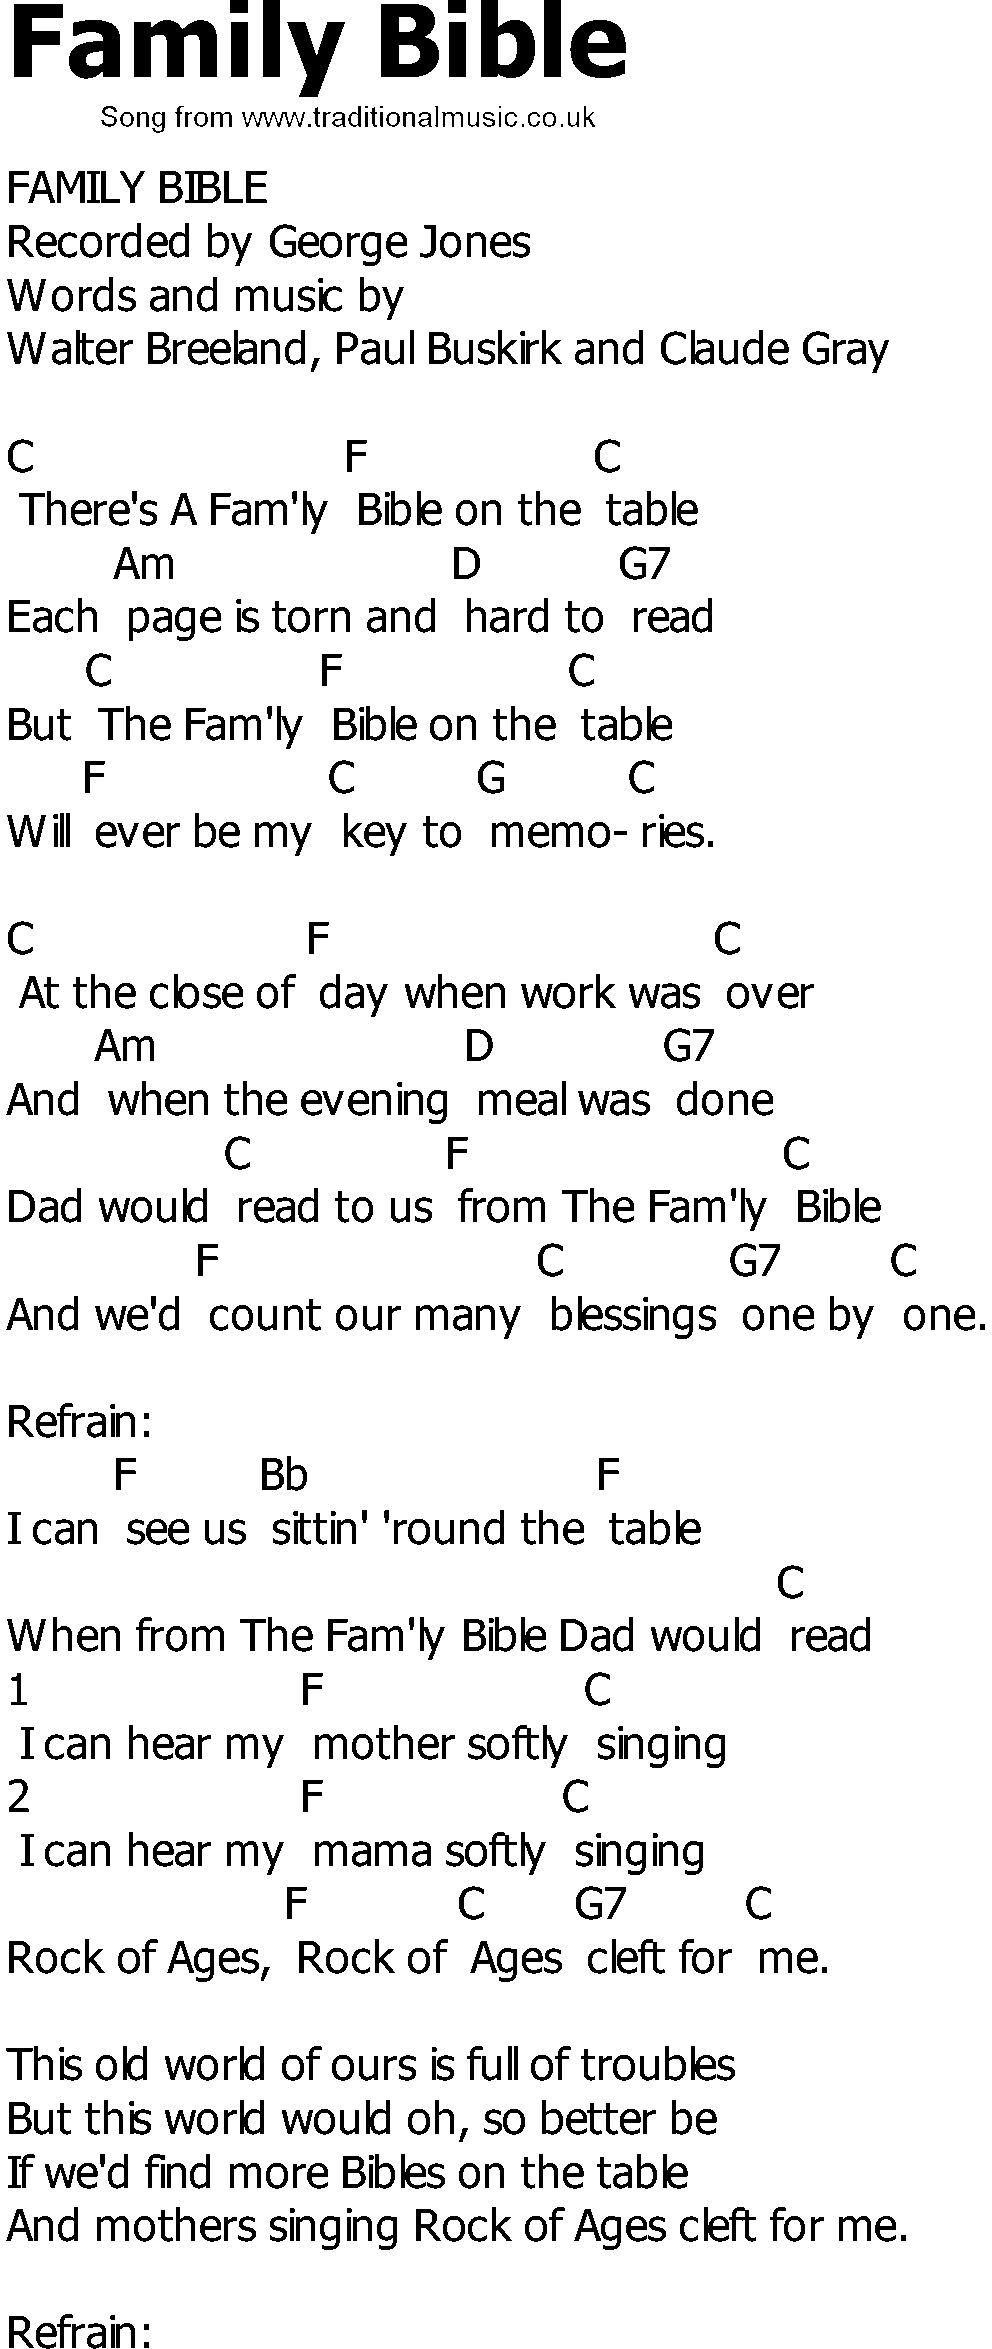 Old Country song lyrics with chords - Family Bible